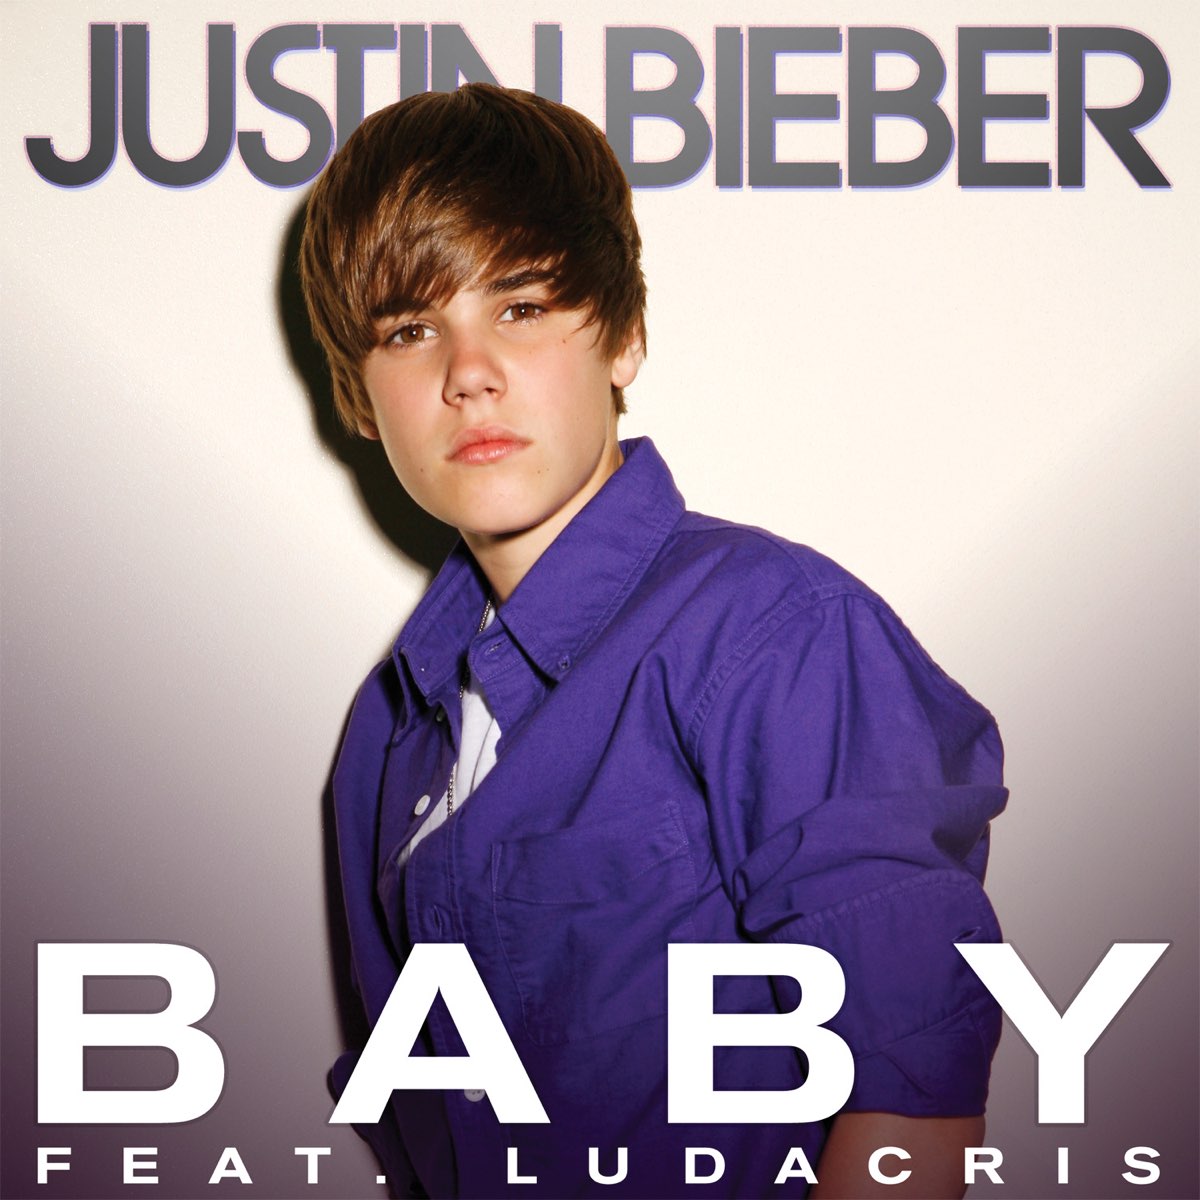 Baby Feat Ludacris Single By Justin Bieber On Apple Music